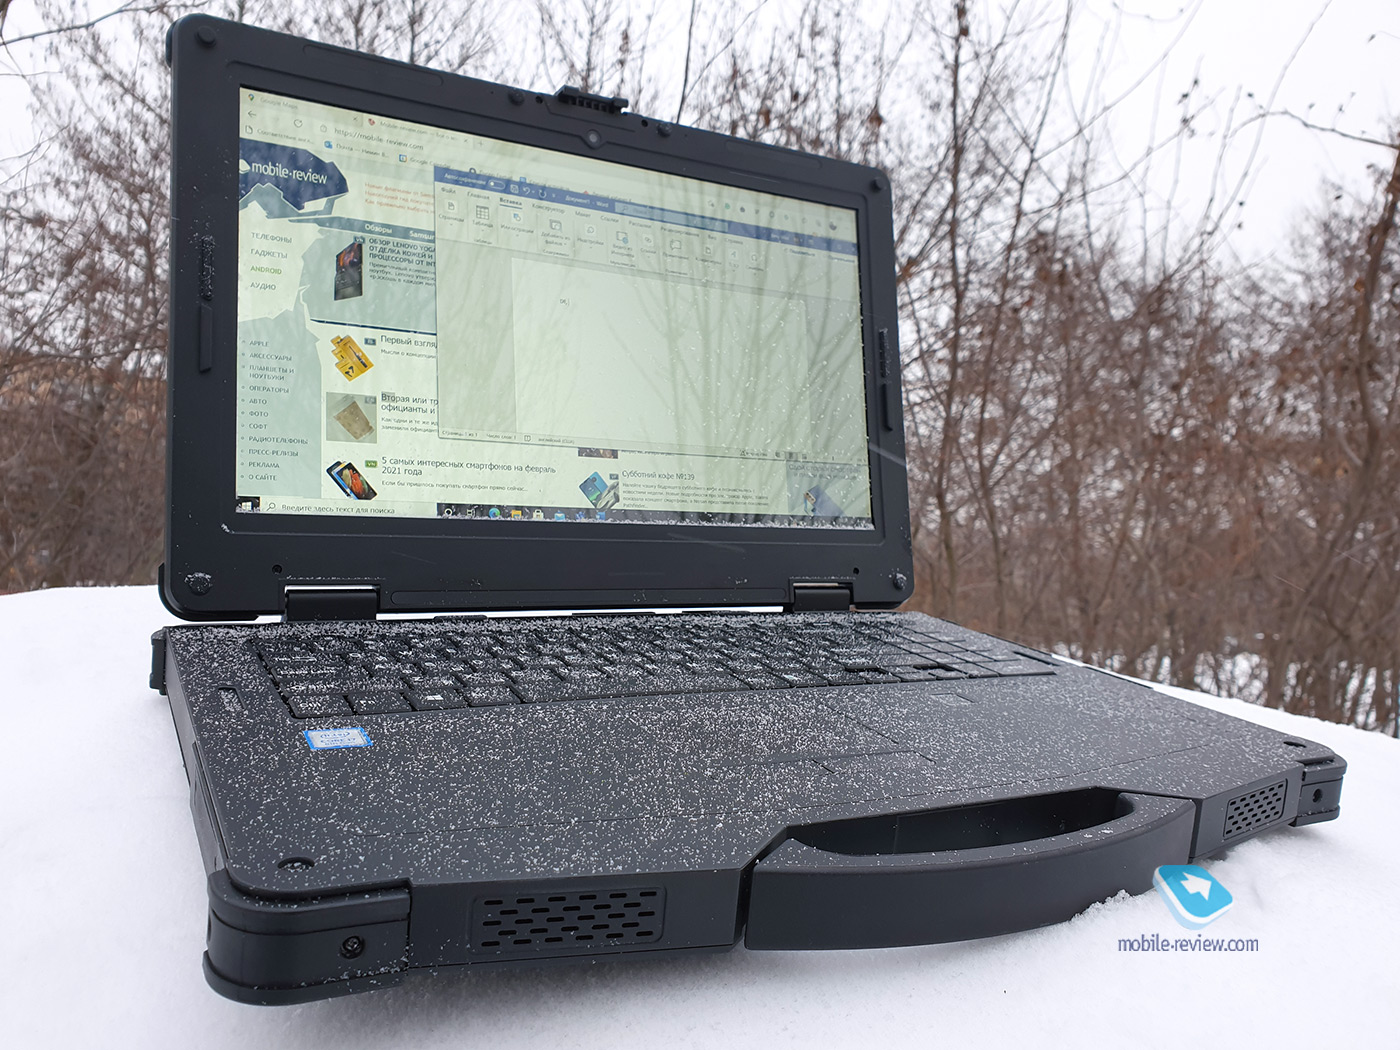 Rugged Acer ENDURO N7 laptop: to make work stand out